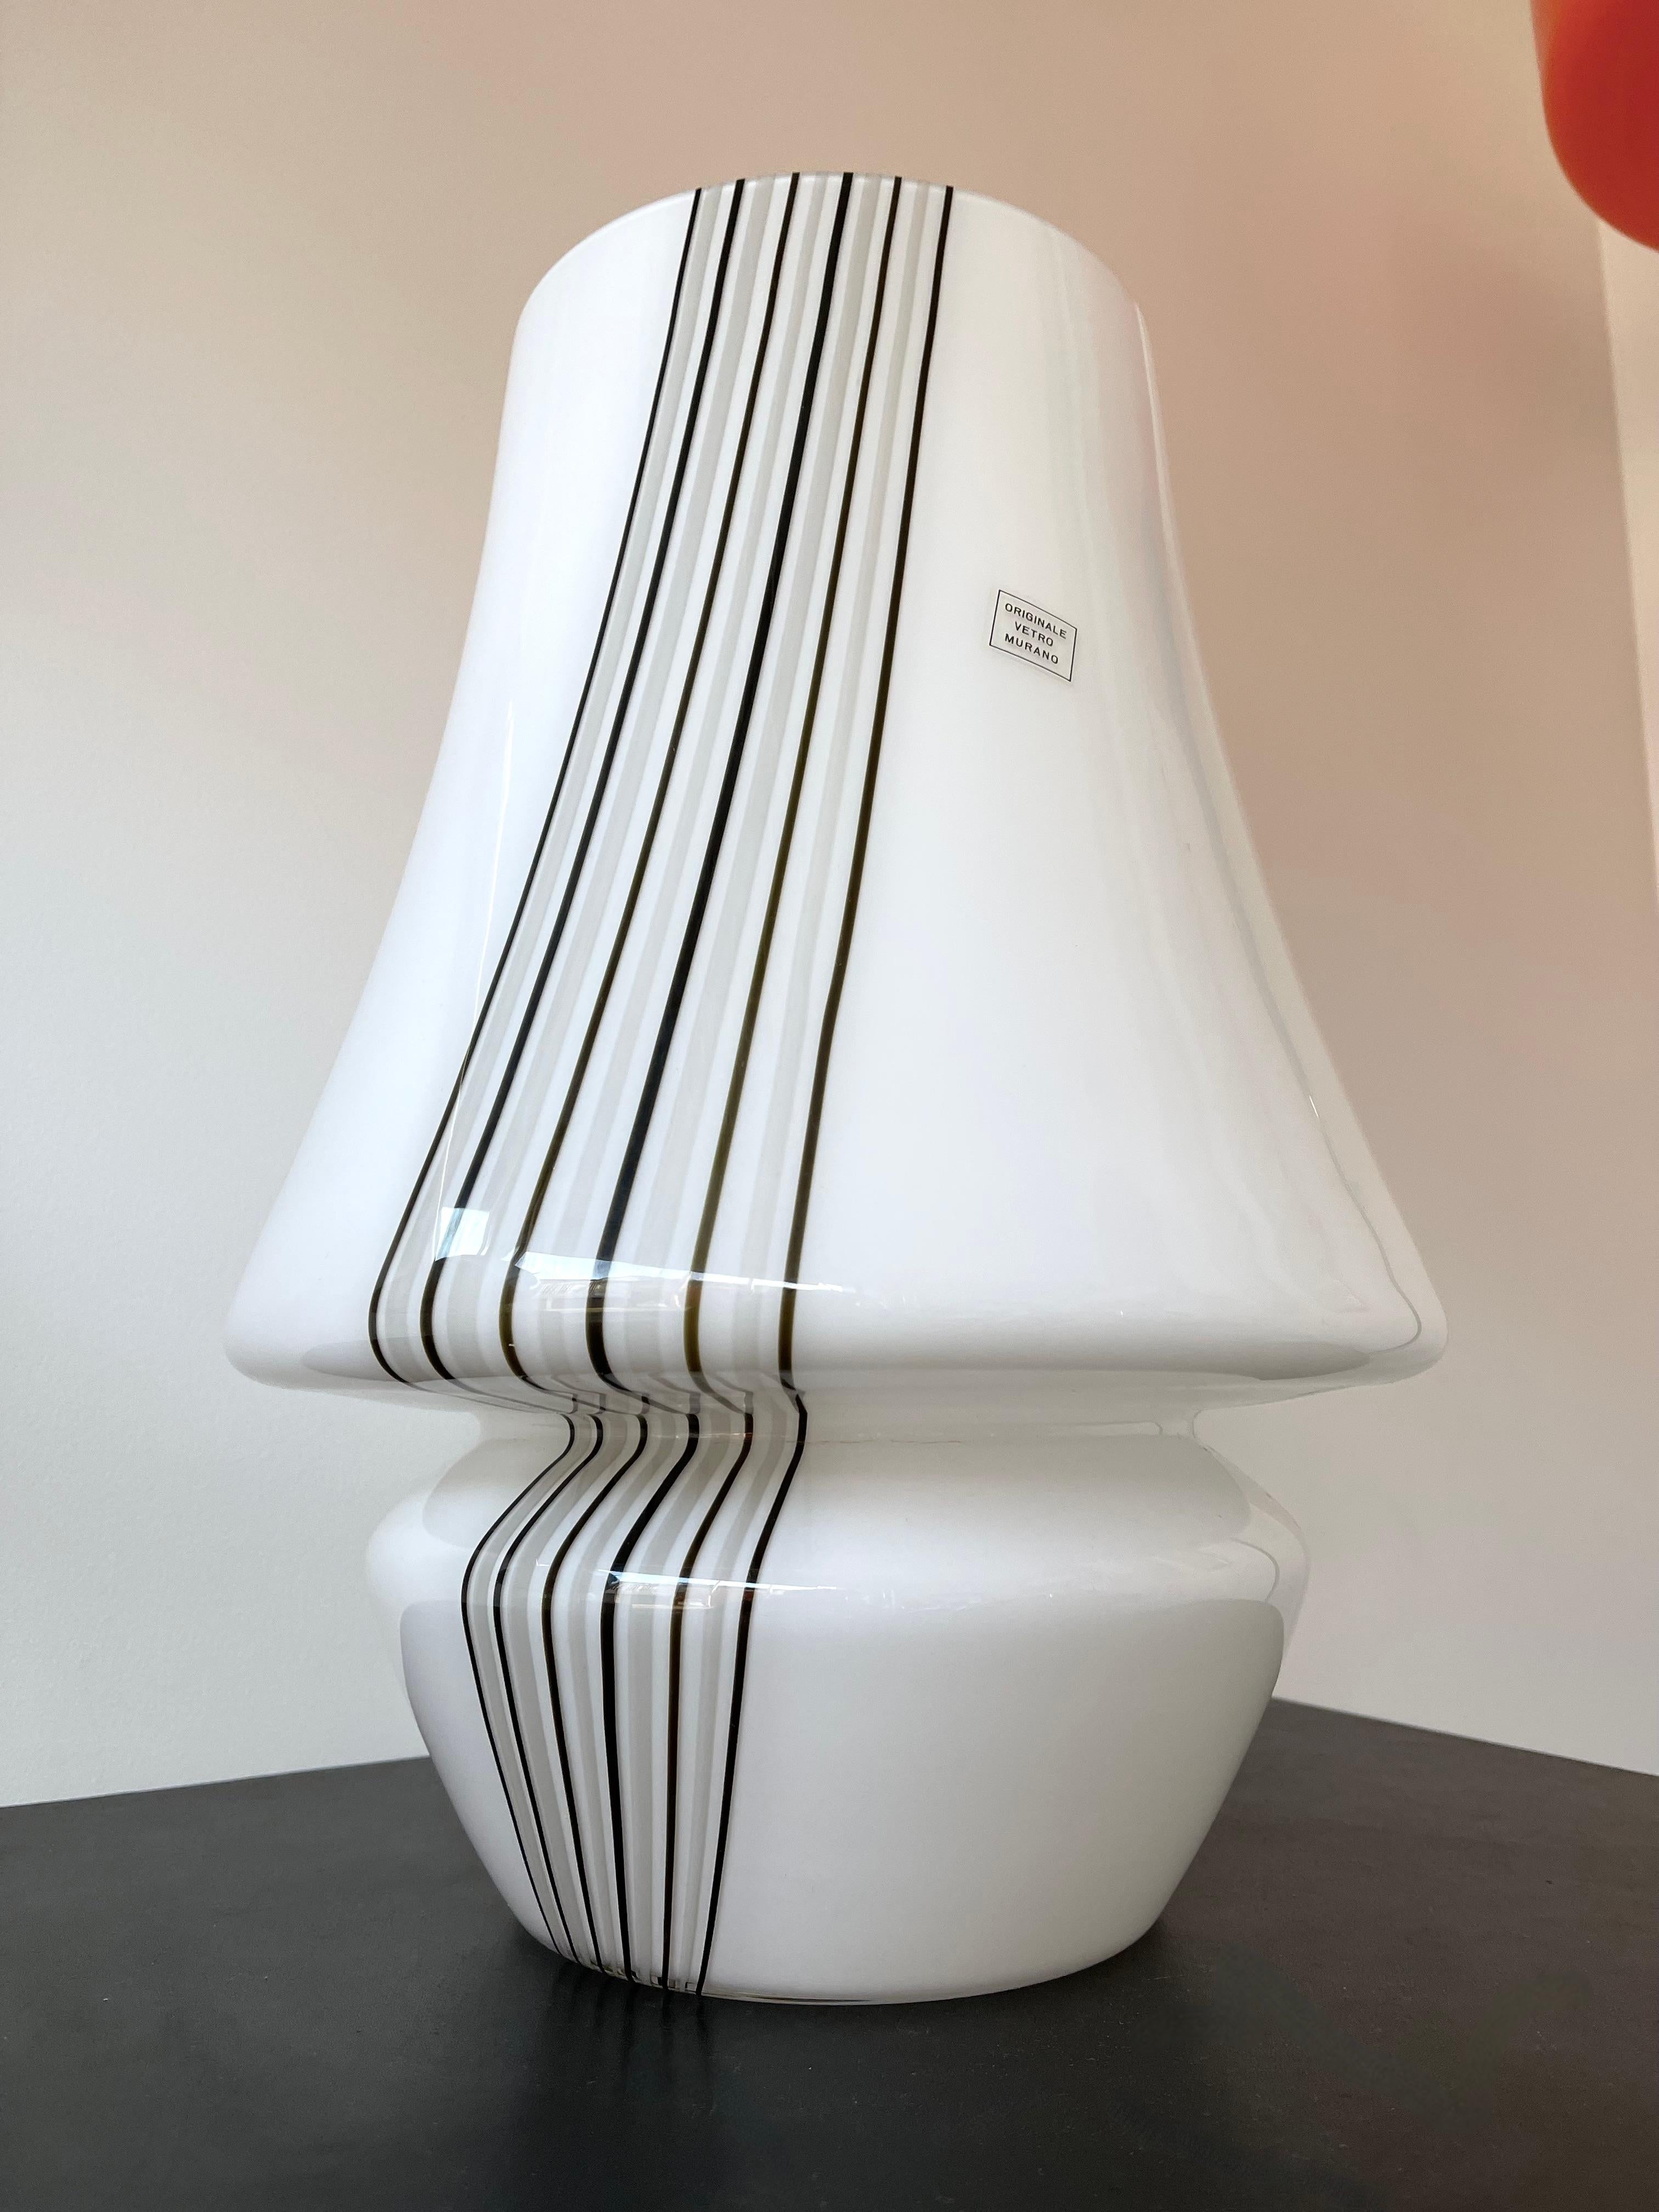 Pair of Large Stripe Murano Glass Lamps, Italy, 1970s For Sale 7